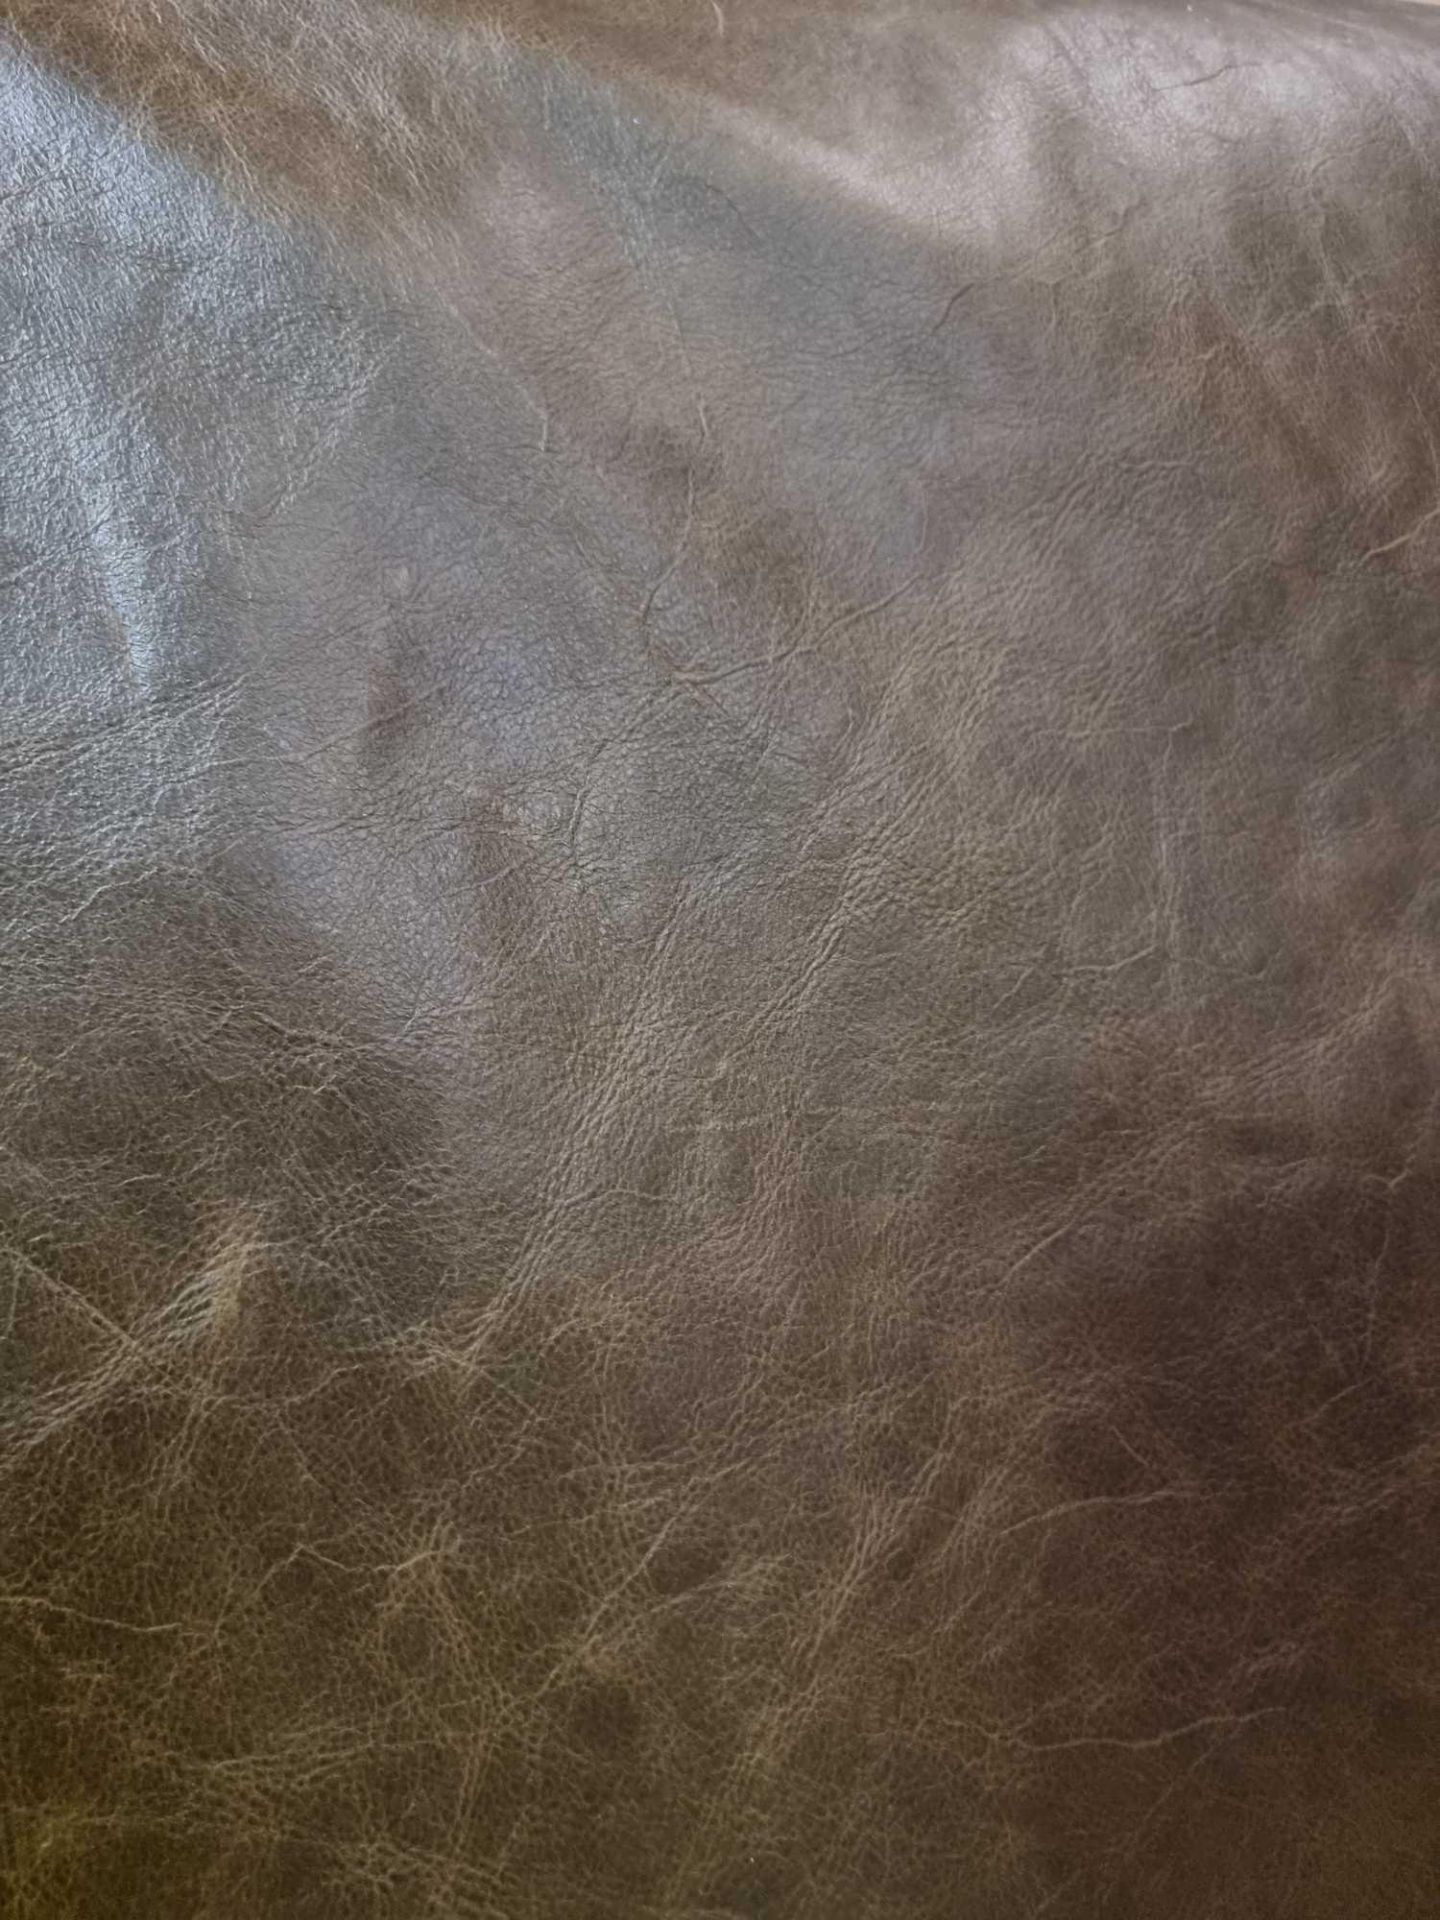 Yarwood Mustang Moss Leather Hide approximately 4.62mÂ² 2.2 x 2.1cm - Image 2 of 3